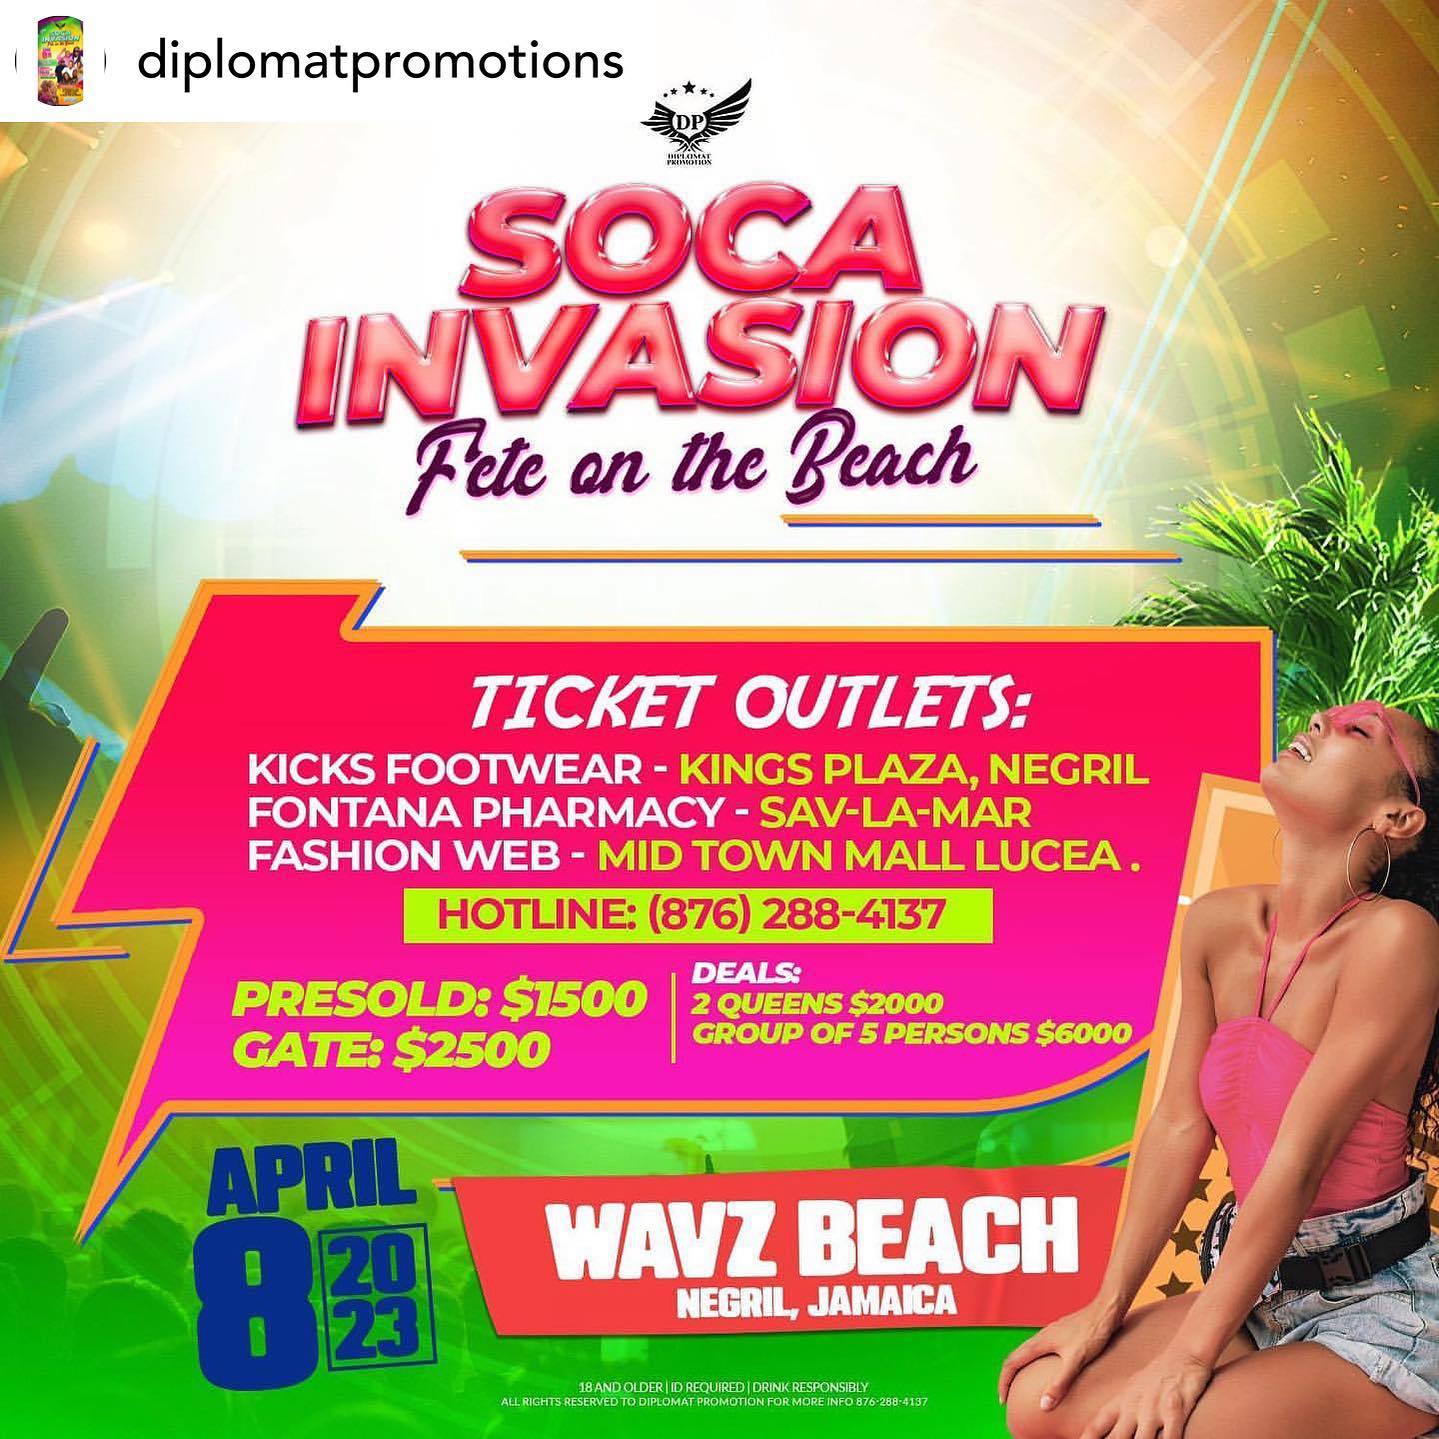 Get your crew ready 🕺Soca Invasion will be taking over Wavz Beach 🏝️ Negril this Easter Saturday April 8th 2023

Tickets are available 
 Presold $1500
Gate $2500
2 Queens 🏽 $2000
 Crew Deal (5 persons) $6000

Outlets 
Kicks Footwear (Negril)
Fontana (Sav)
Fashion Web (Lucea)

Music by:
@chromaticlive 
@johnnycyaankool 
@djmax_the_ultimate 
@xx3rafyah 

Hosted by :
@mcblazze 

Get your Crew ,Rags and Horn ready 🕺🥳 to come mash up the place with the baddest dj’s